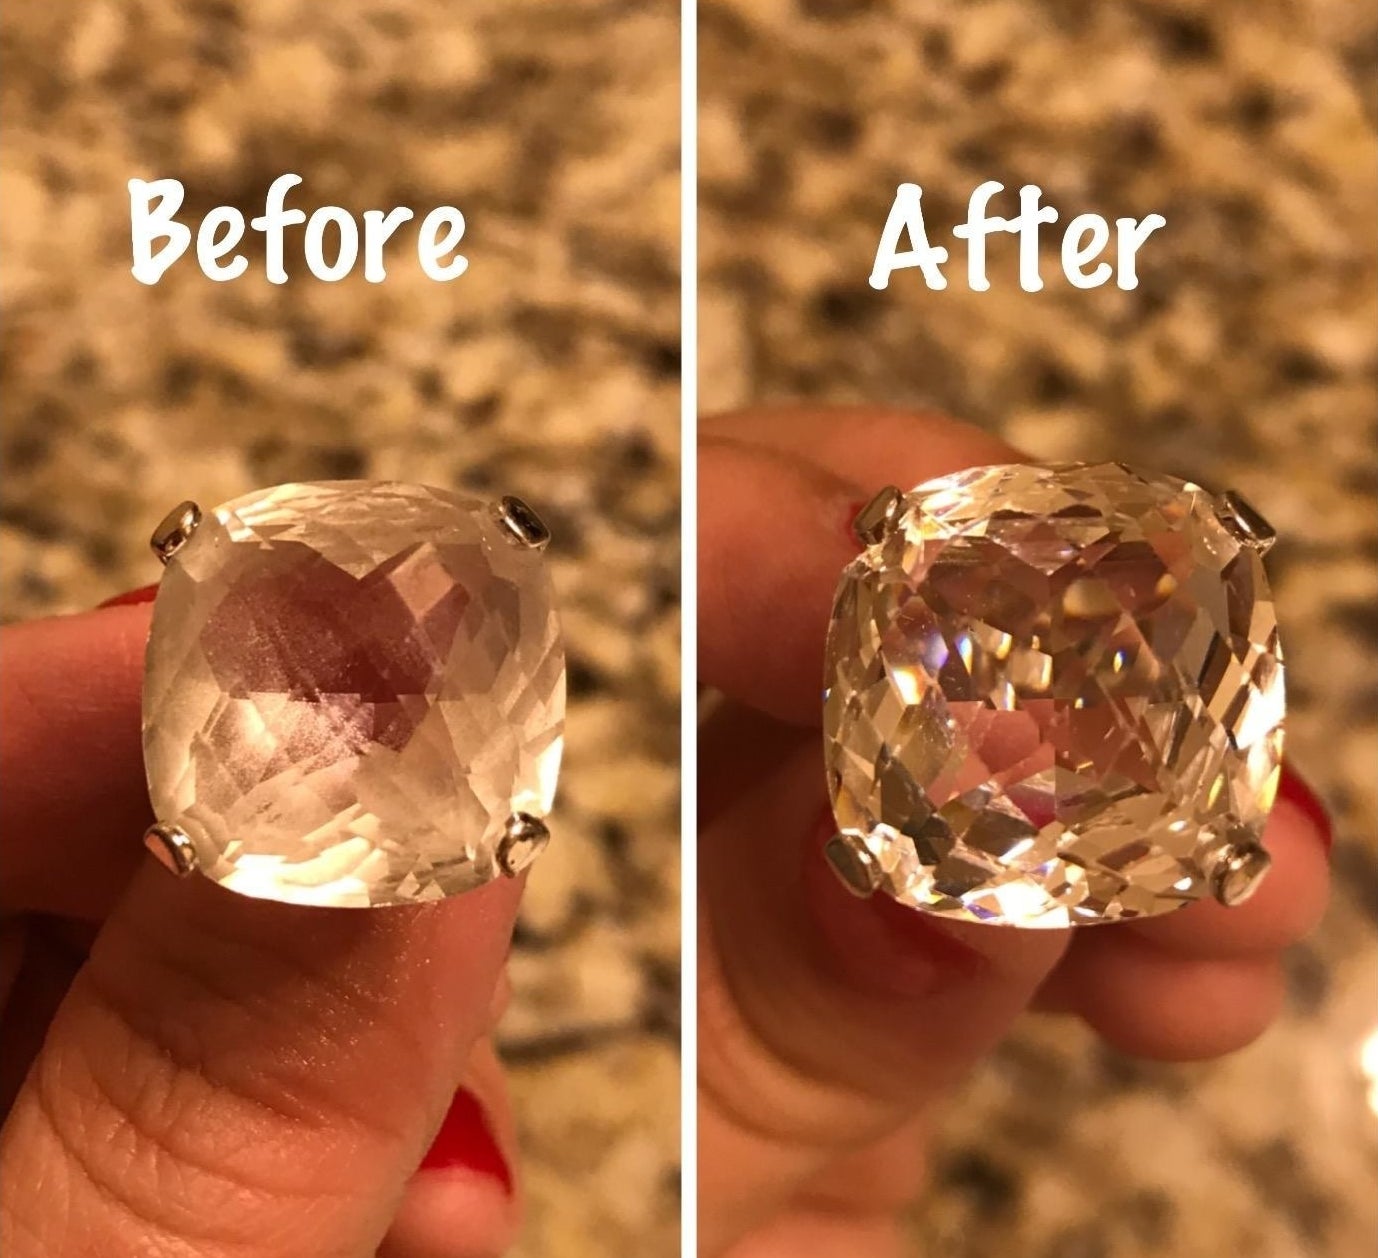 Reviewer photo showing a ring before and after using the pen. The dull ring becomes completely clear and sparkling